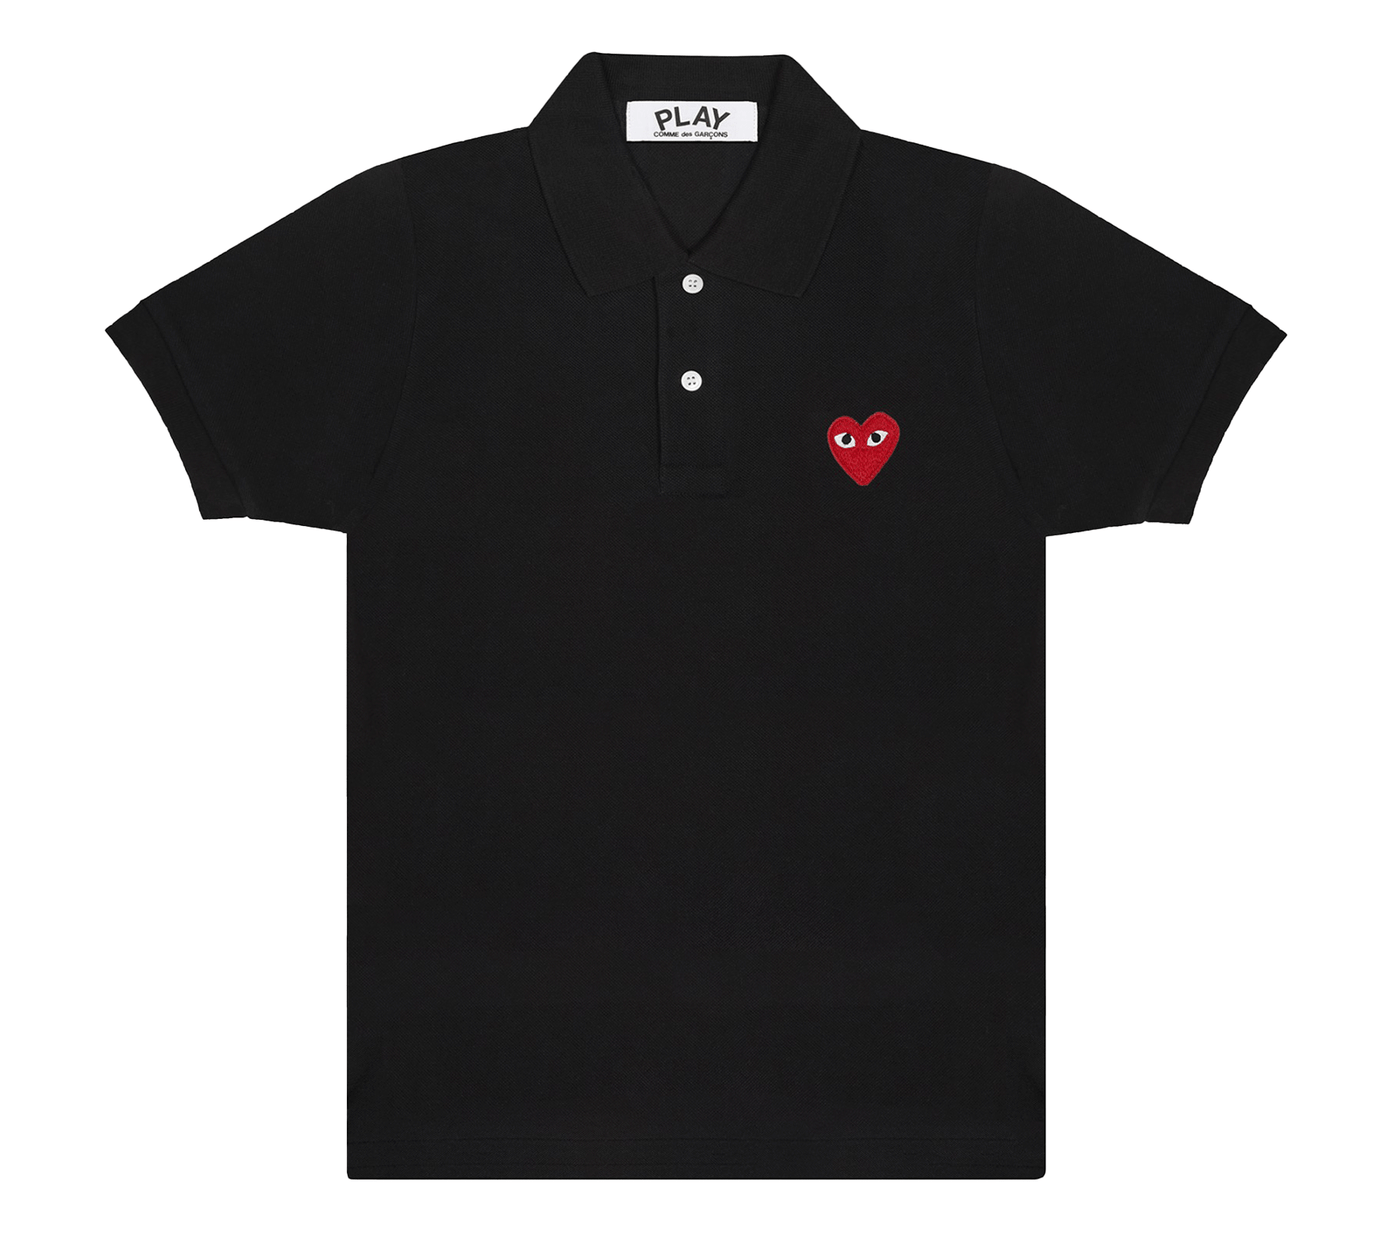    Comme-des-Garcons-Play-Polo-Shirt-with-Red-Emblem-Men-Black-1